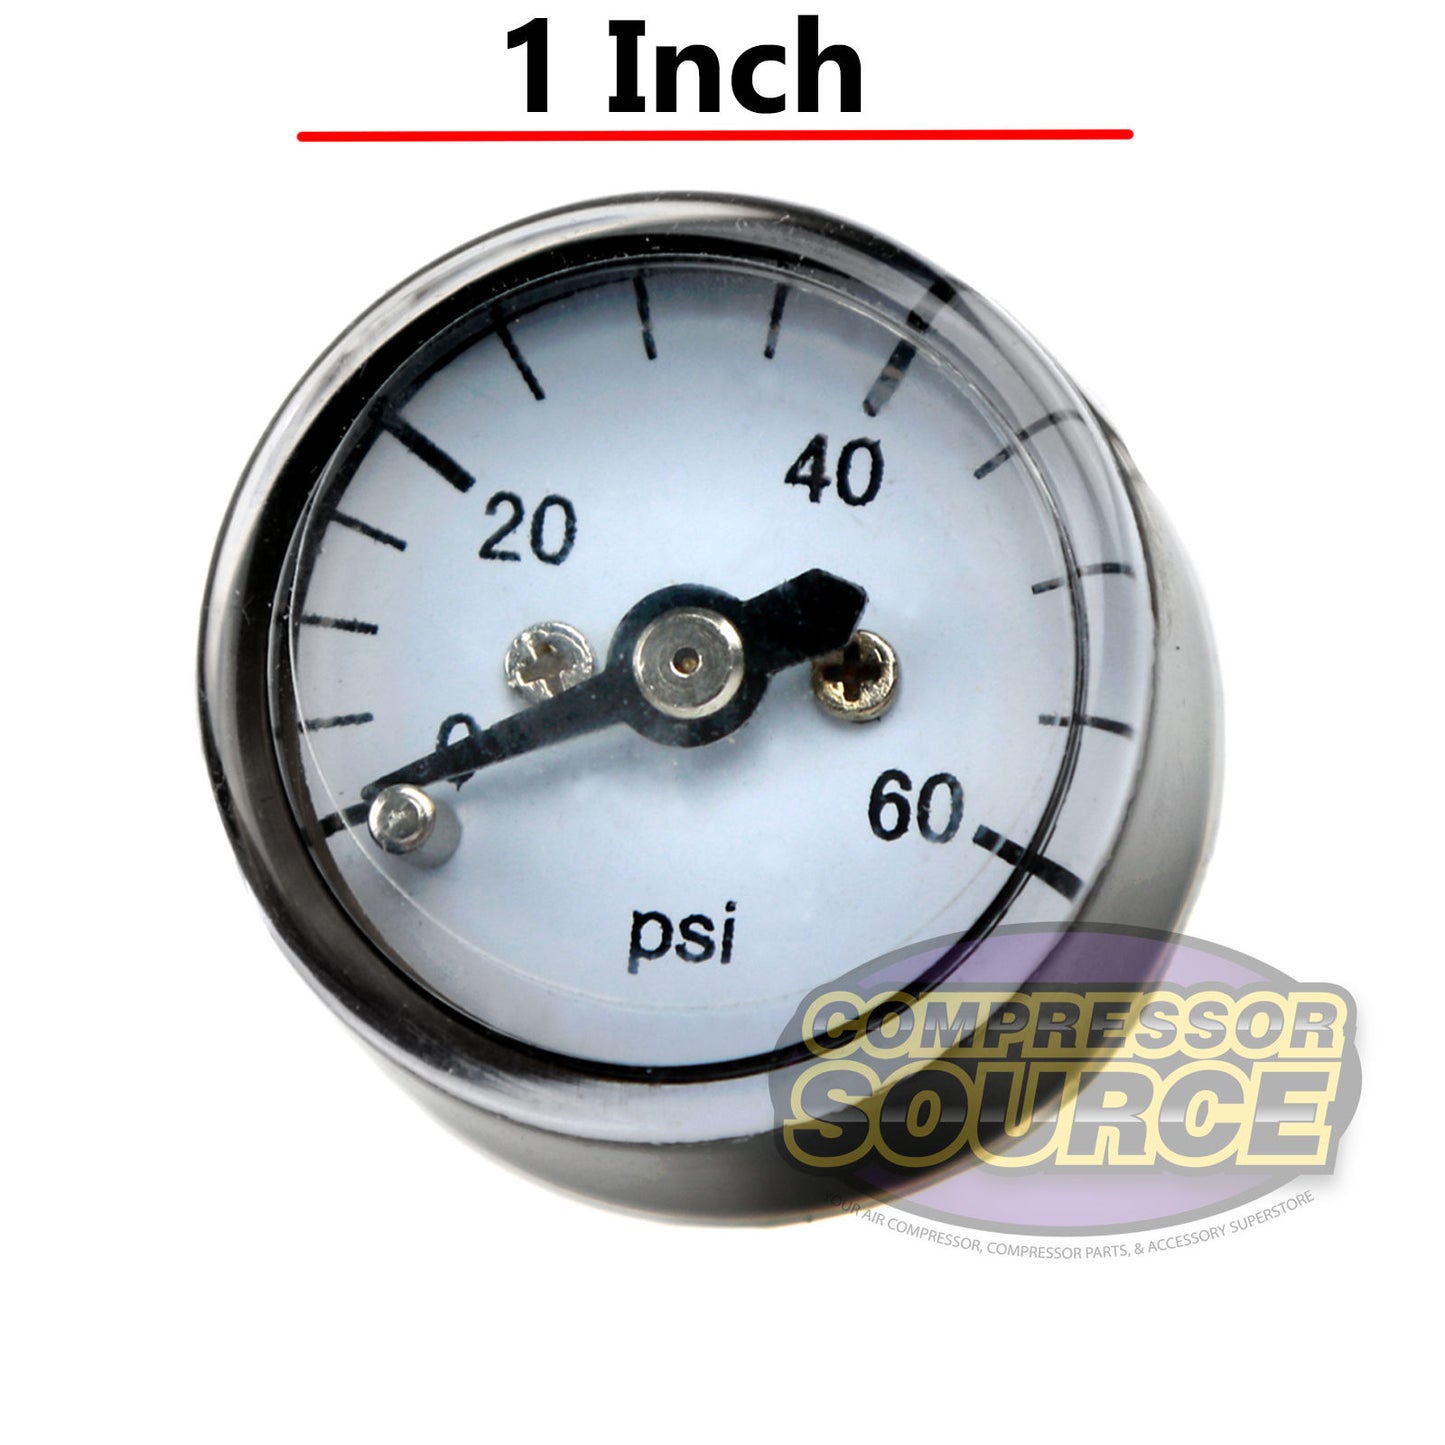 1/8" NPT 0-60 PSI Micro Air Pressure Gauge Center Back Mount With 1" Face